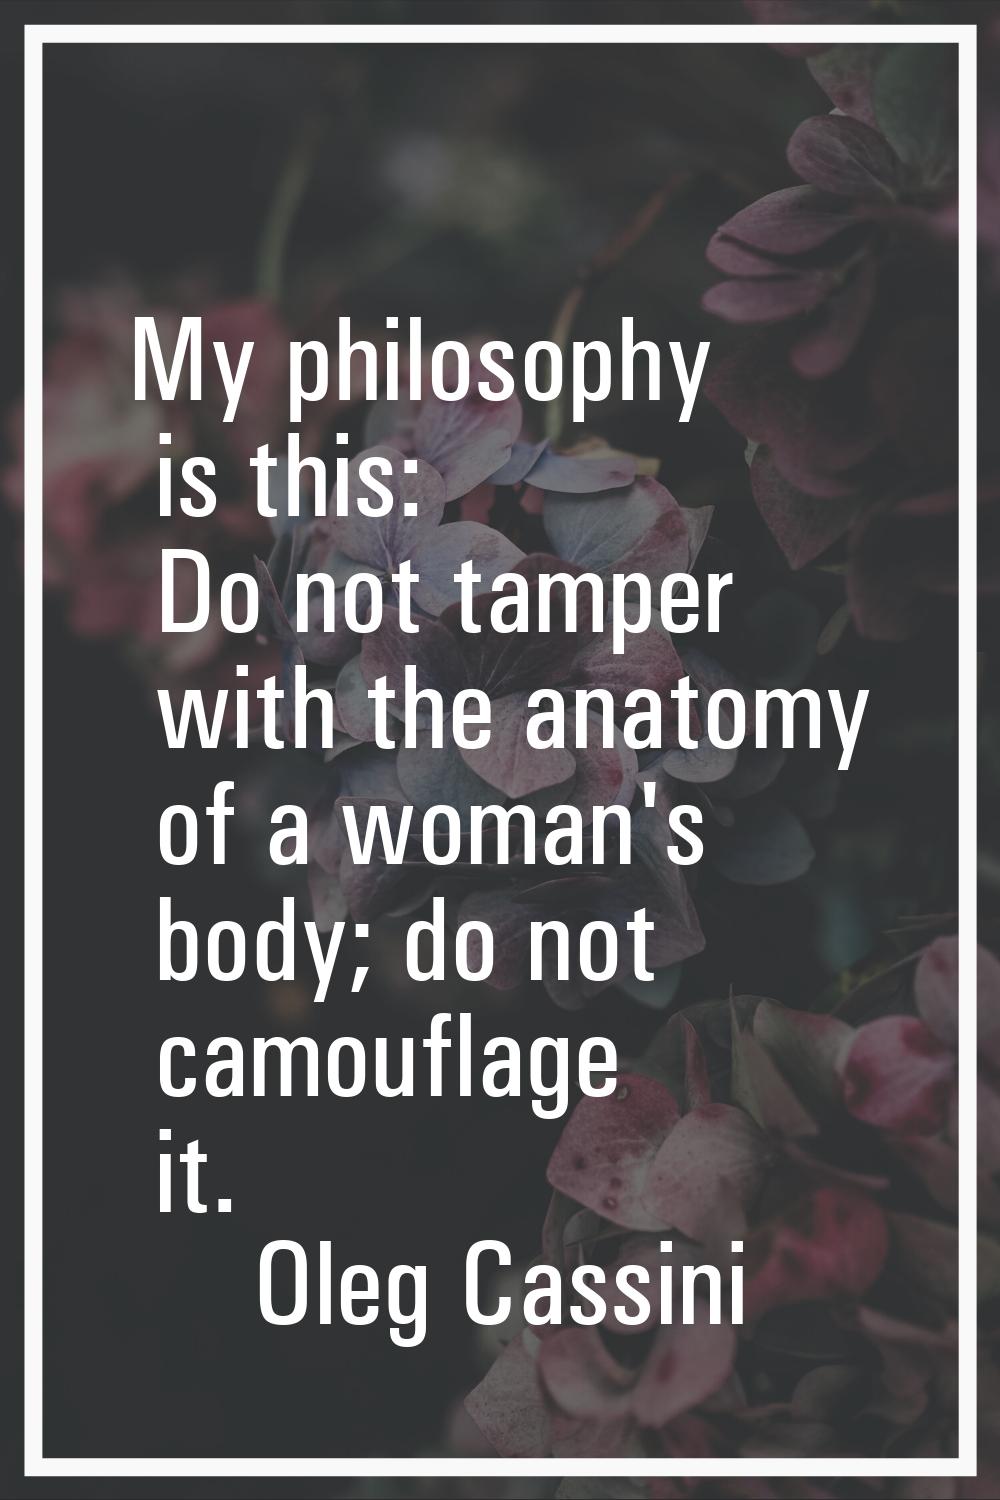 My philosophy is this: Do not tamper with the anatomy of a woman's body; do not camouflage it.